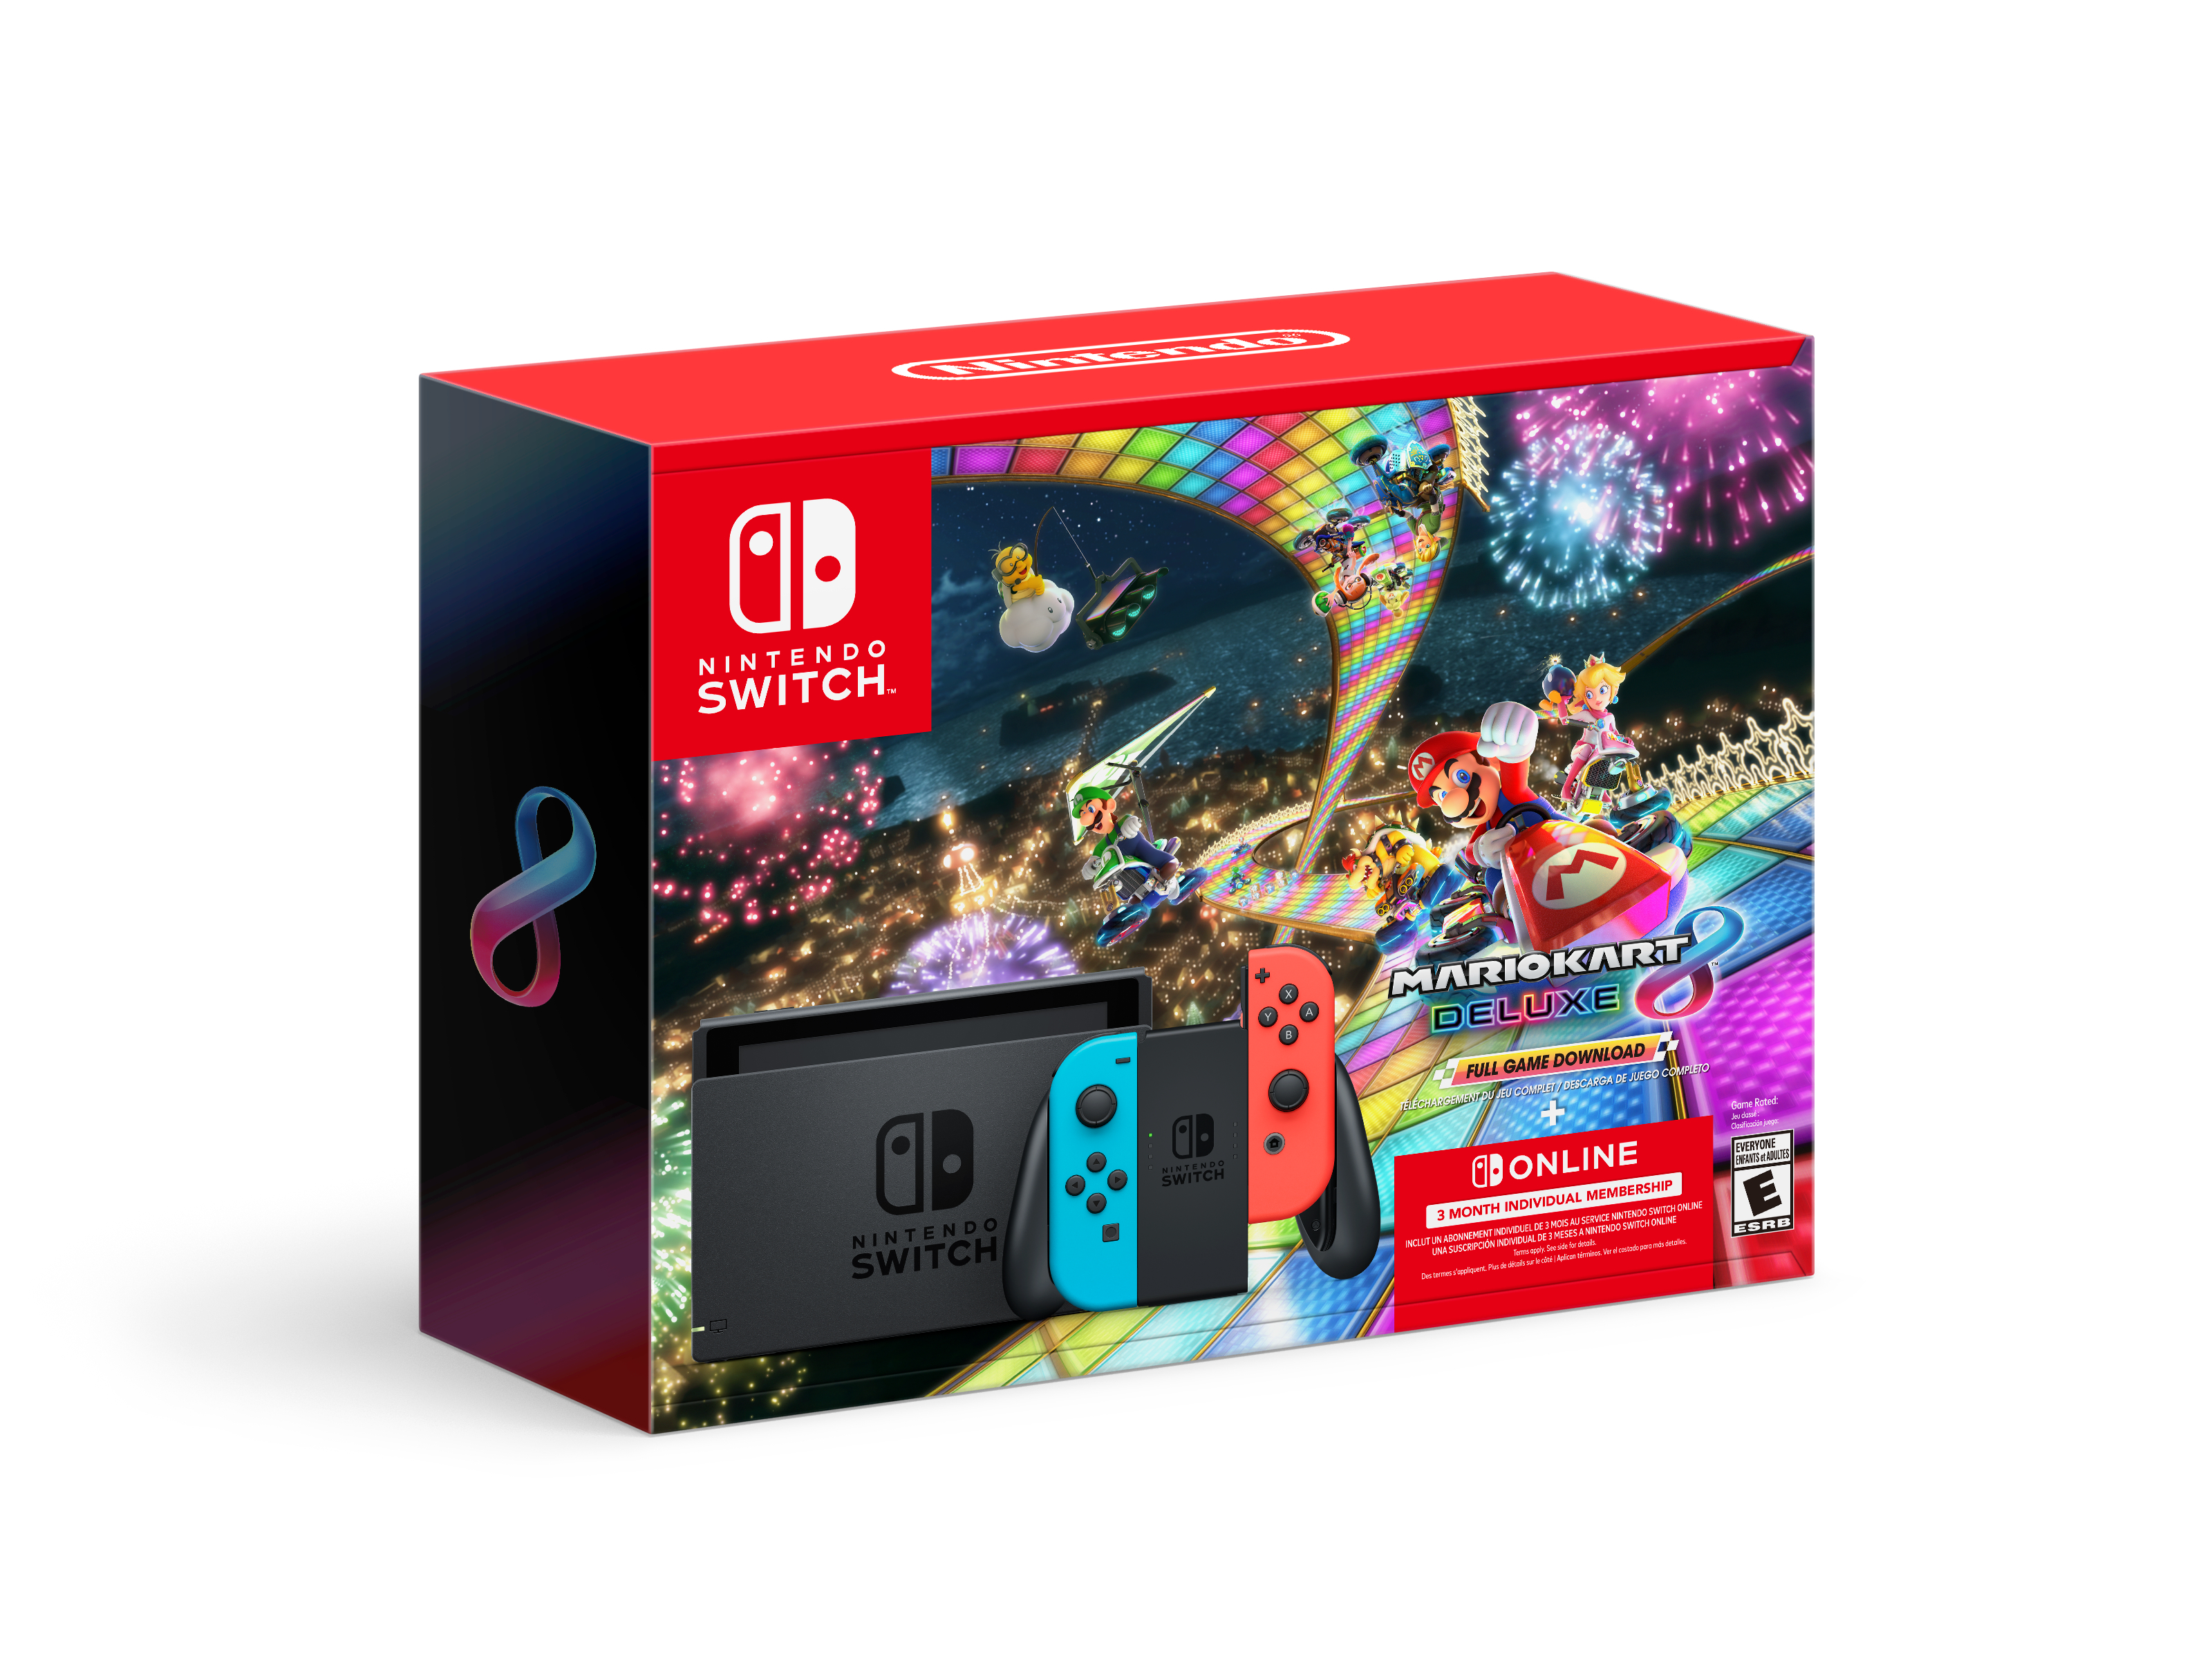 Special offers for Nintendo Switch Online members - Nintendo Official Site